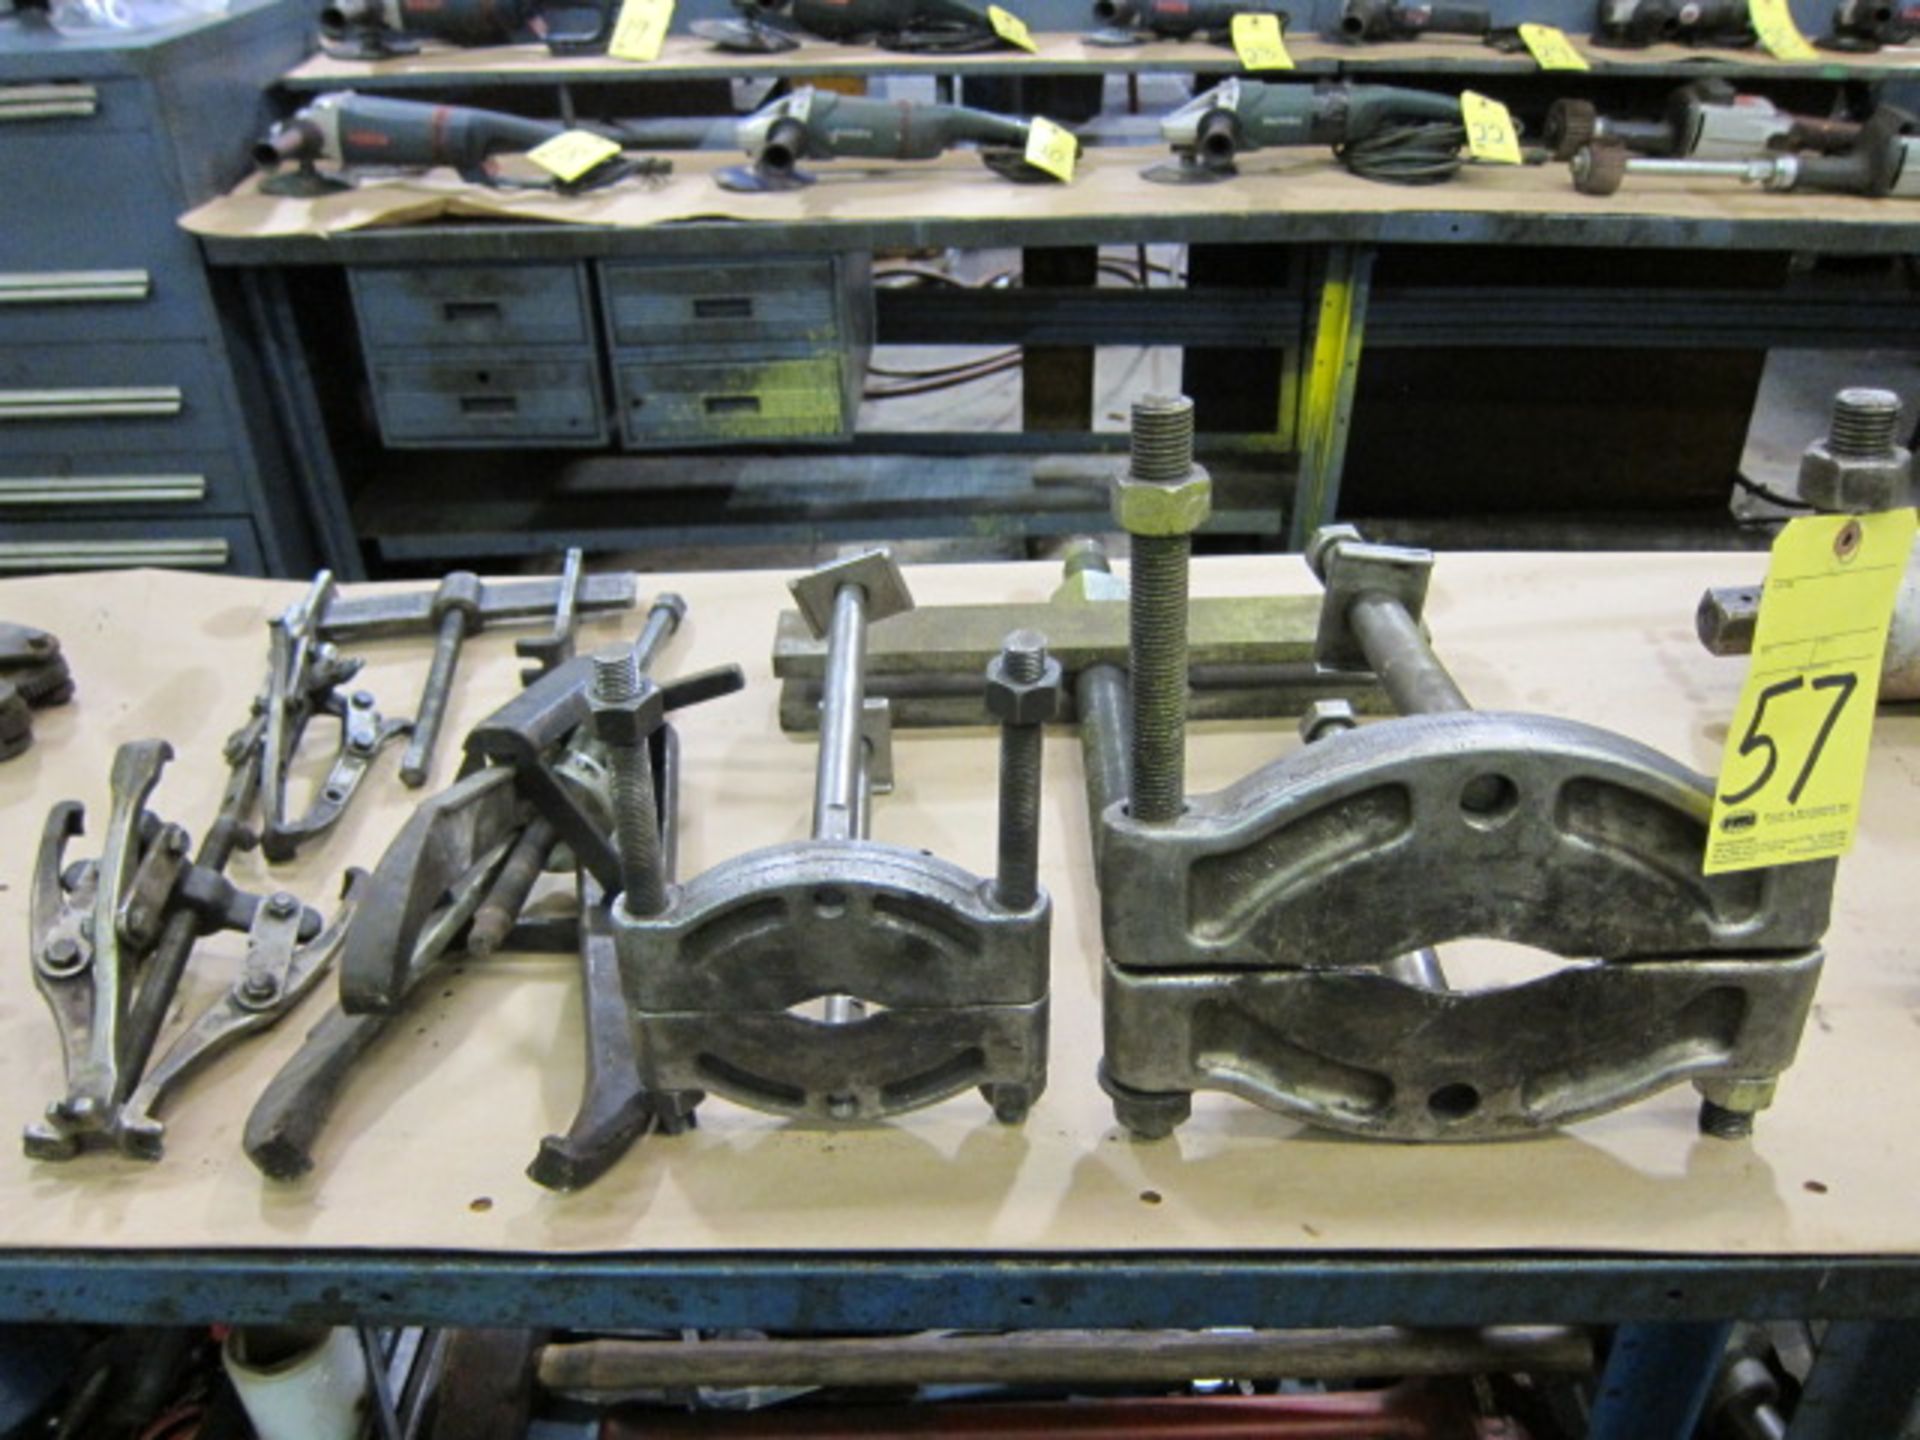 LOT OF WHEEL PULLERS, assorted